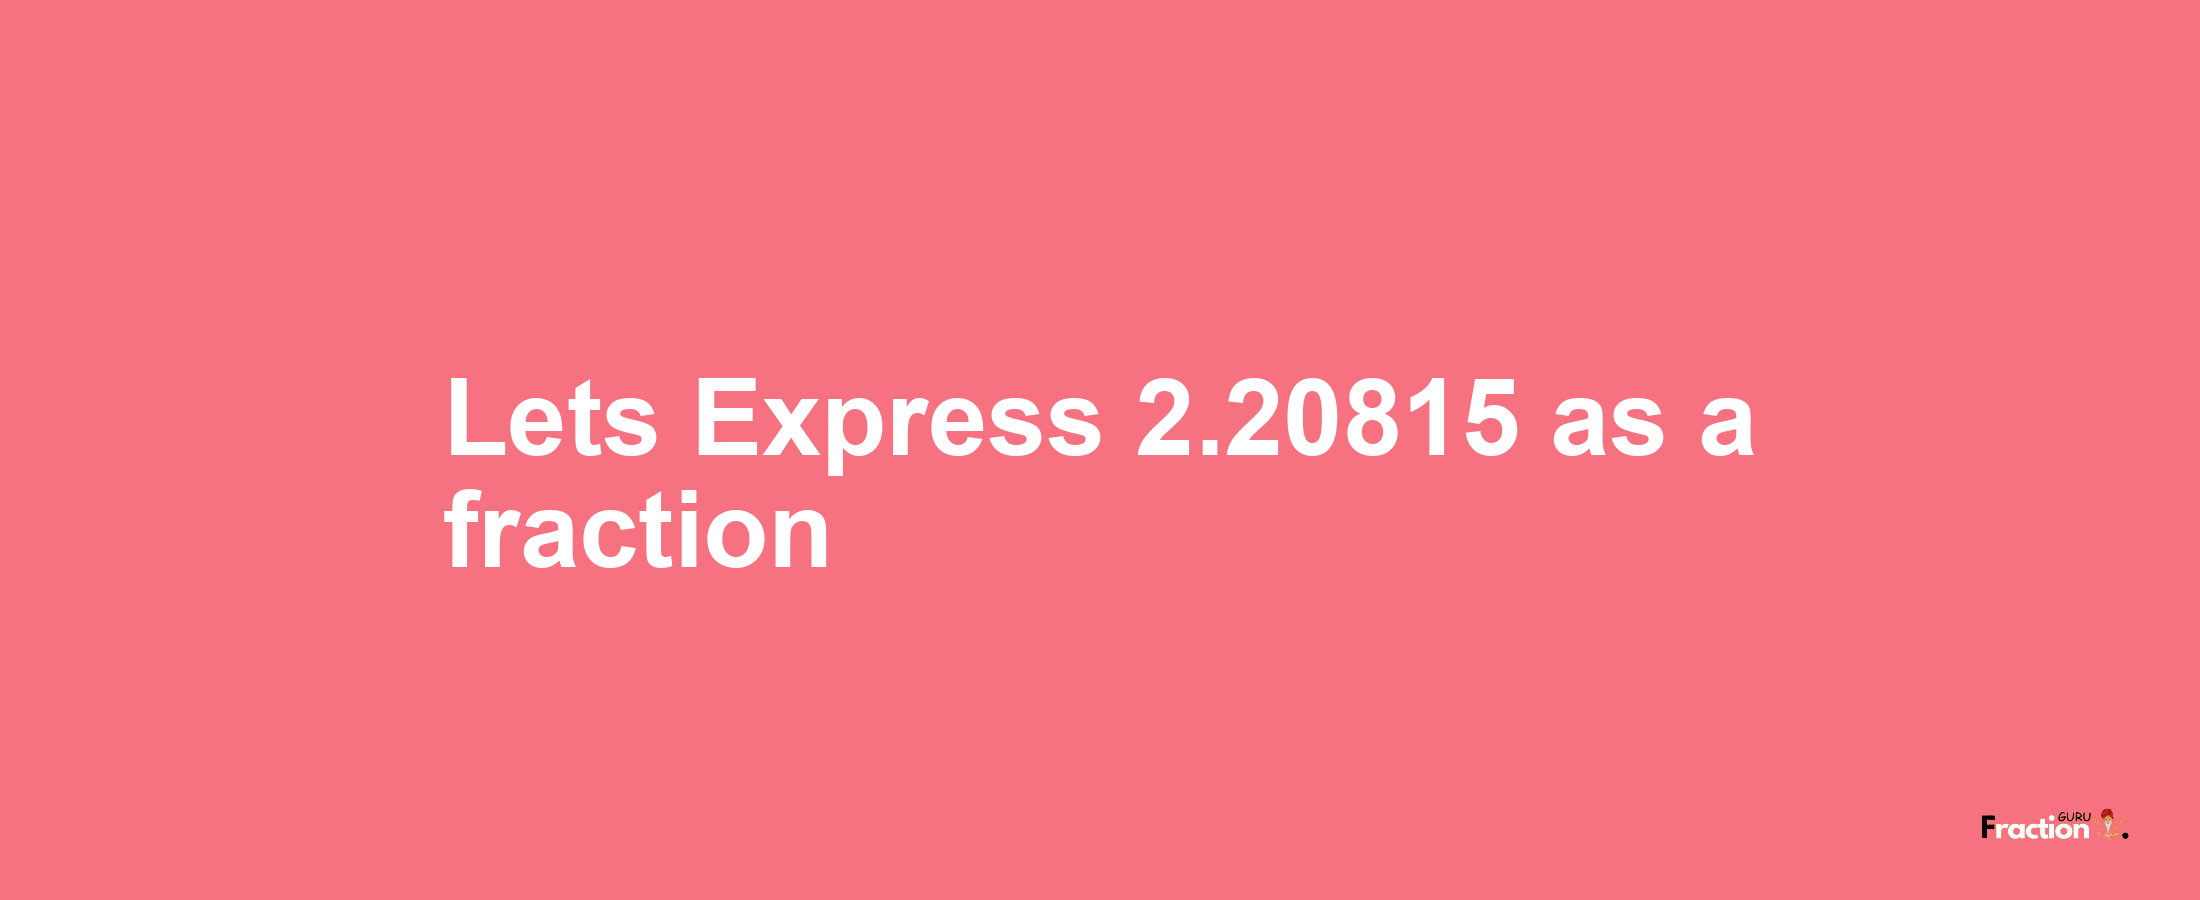 Lets Express 2.20815 as afraction